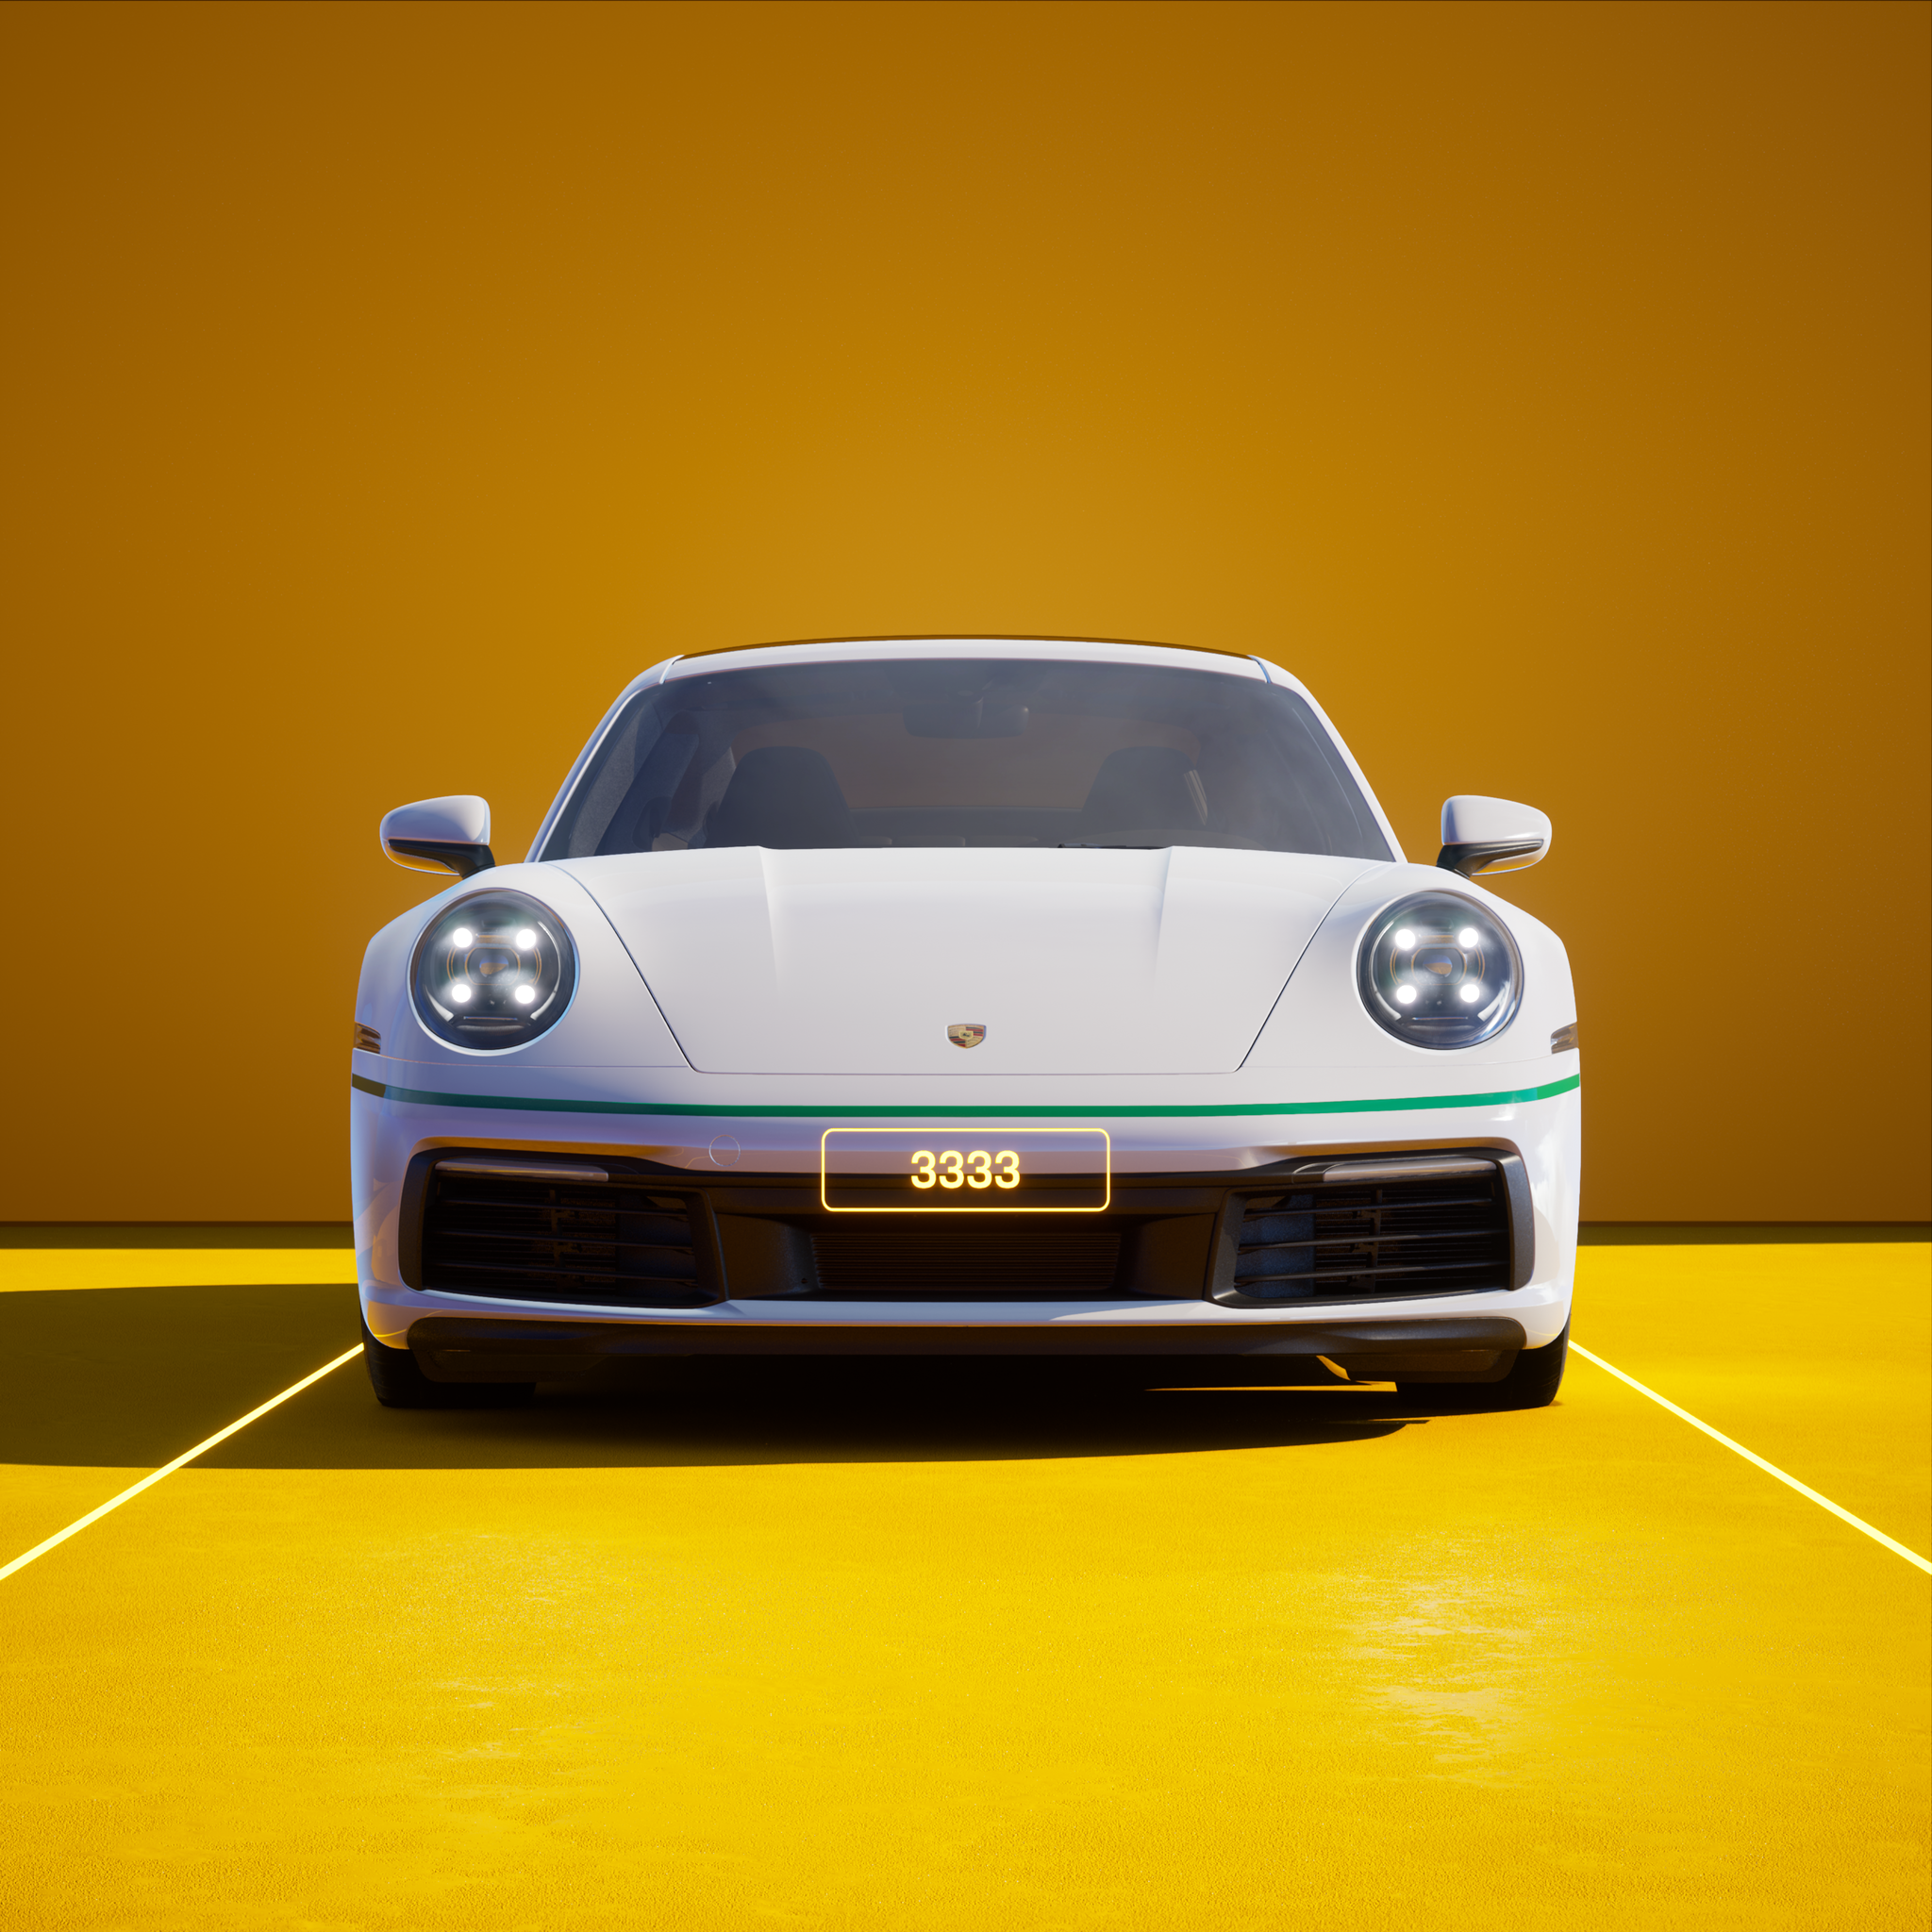 The PORSCHΞ 911 3333 image in phase